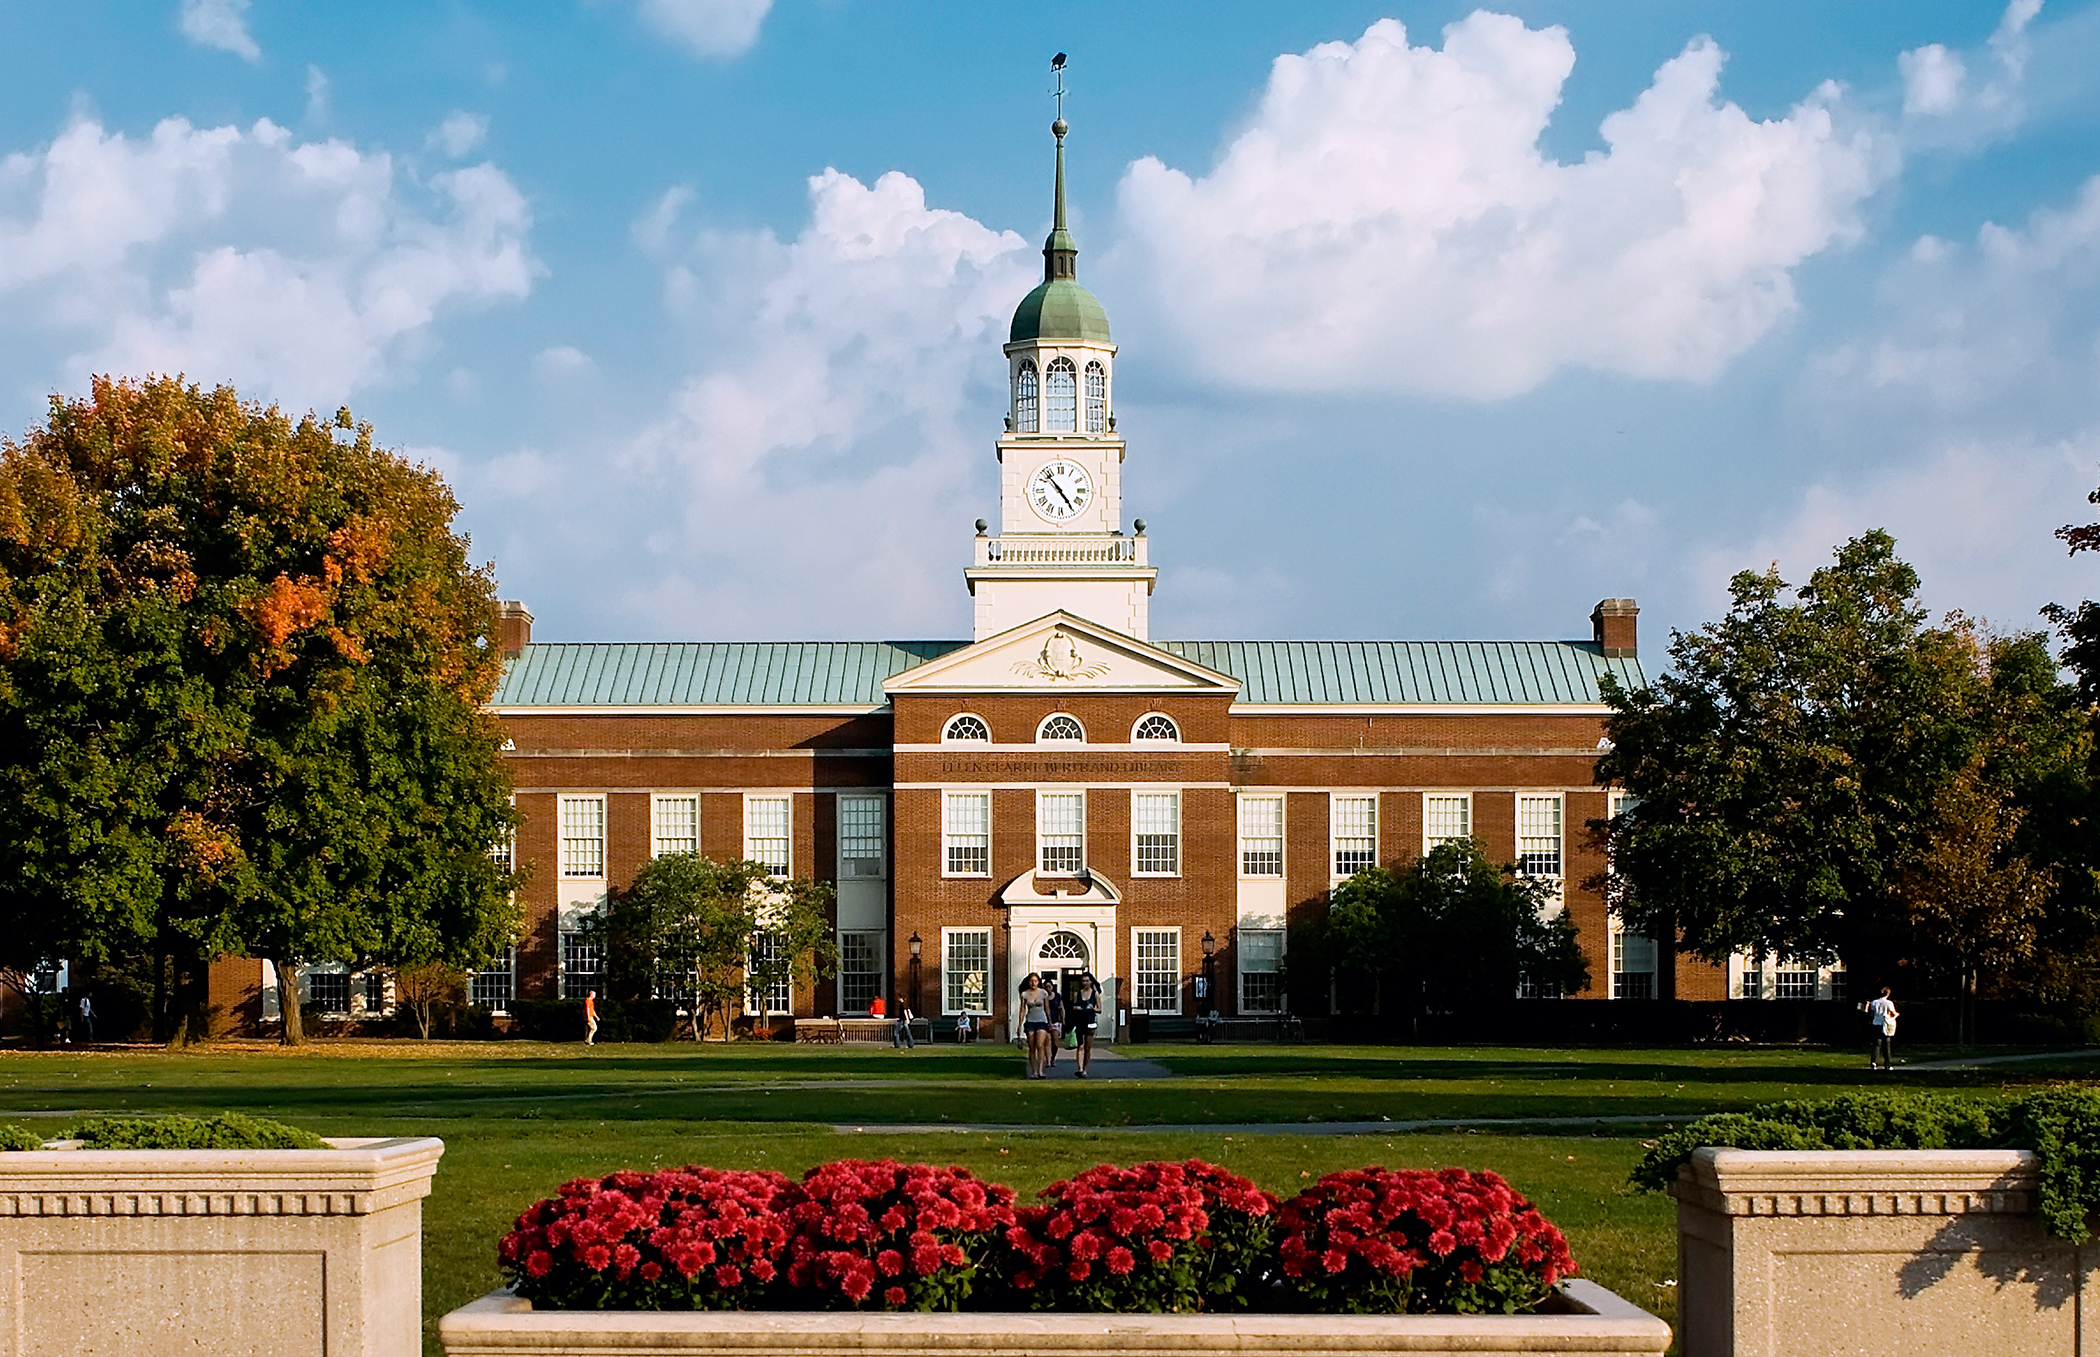 <a href="http://new.money.com/best-colleges/profile/bucknell-university" target="_blank">7. Bucknell University</a>
                                          
                                           	Early earnings: $57,900
                                           	Mid-career earnings: $109,000
                                          